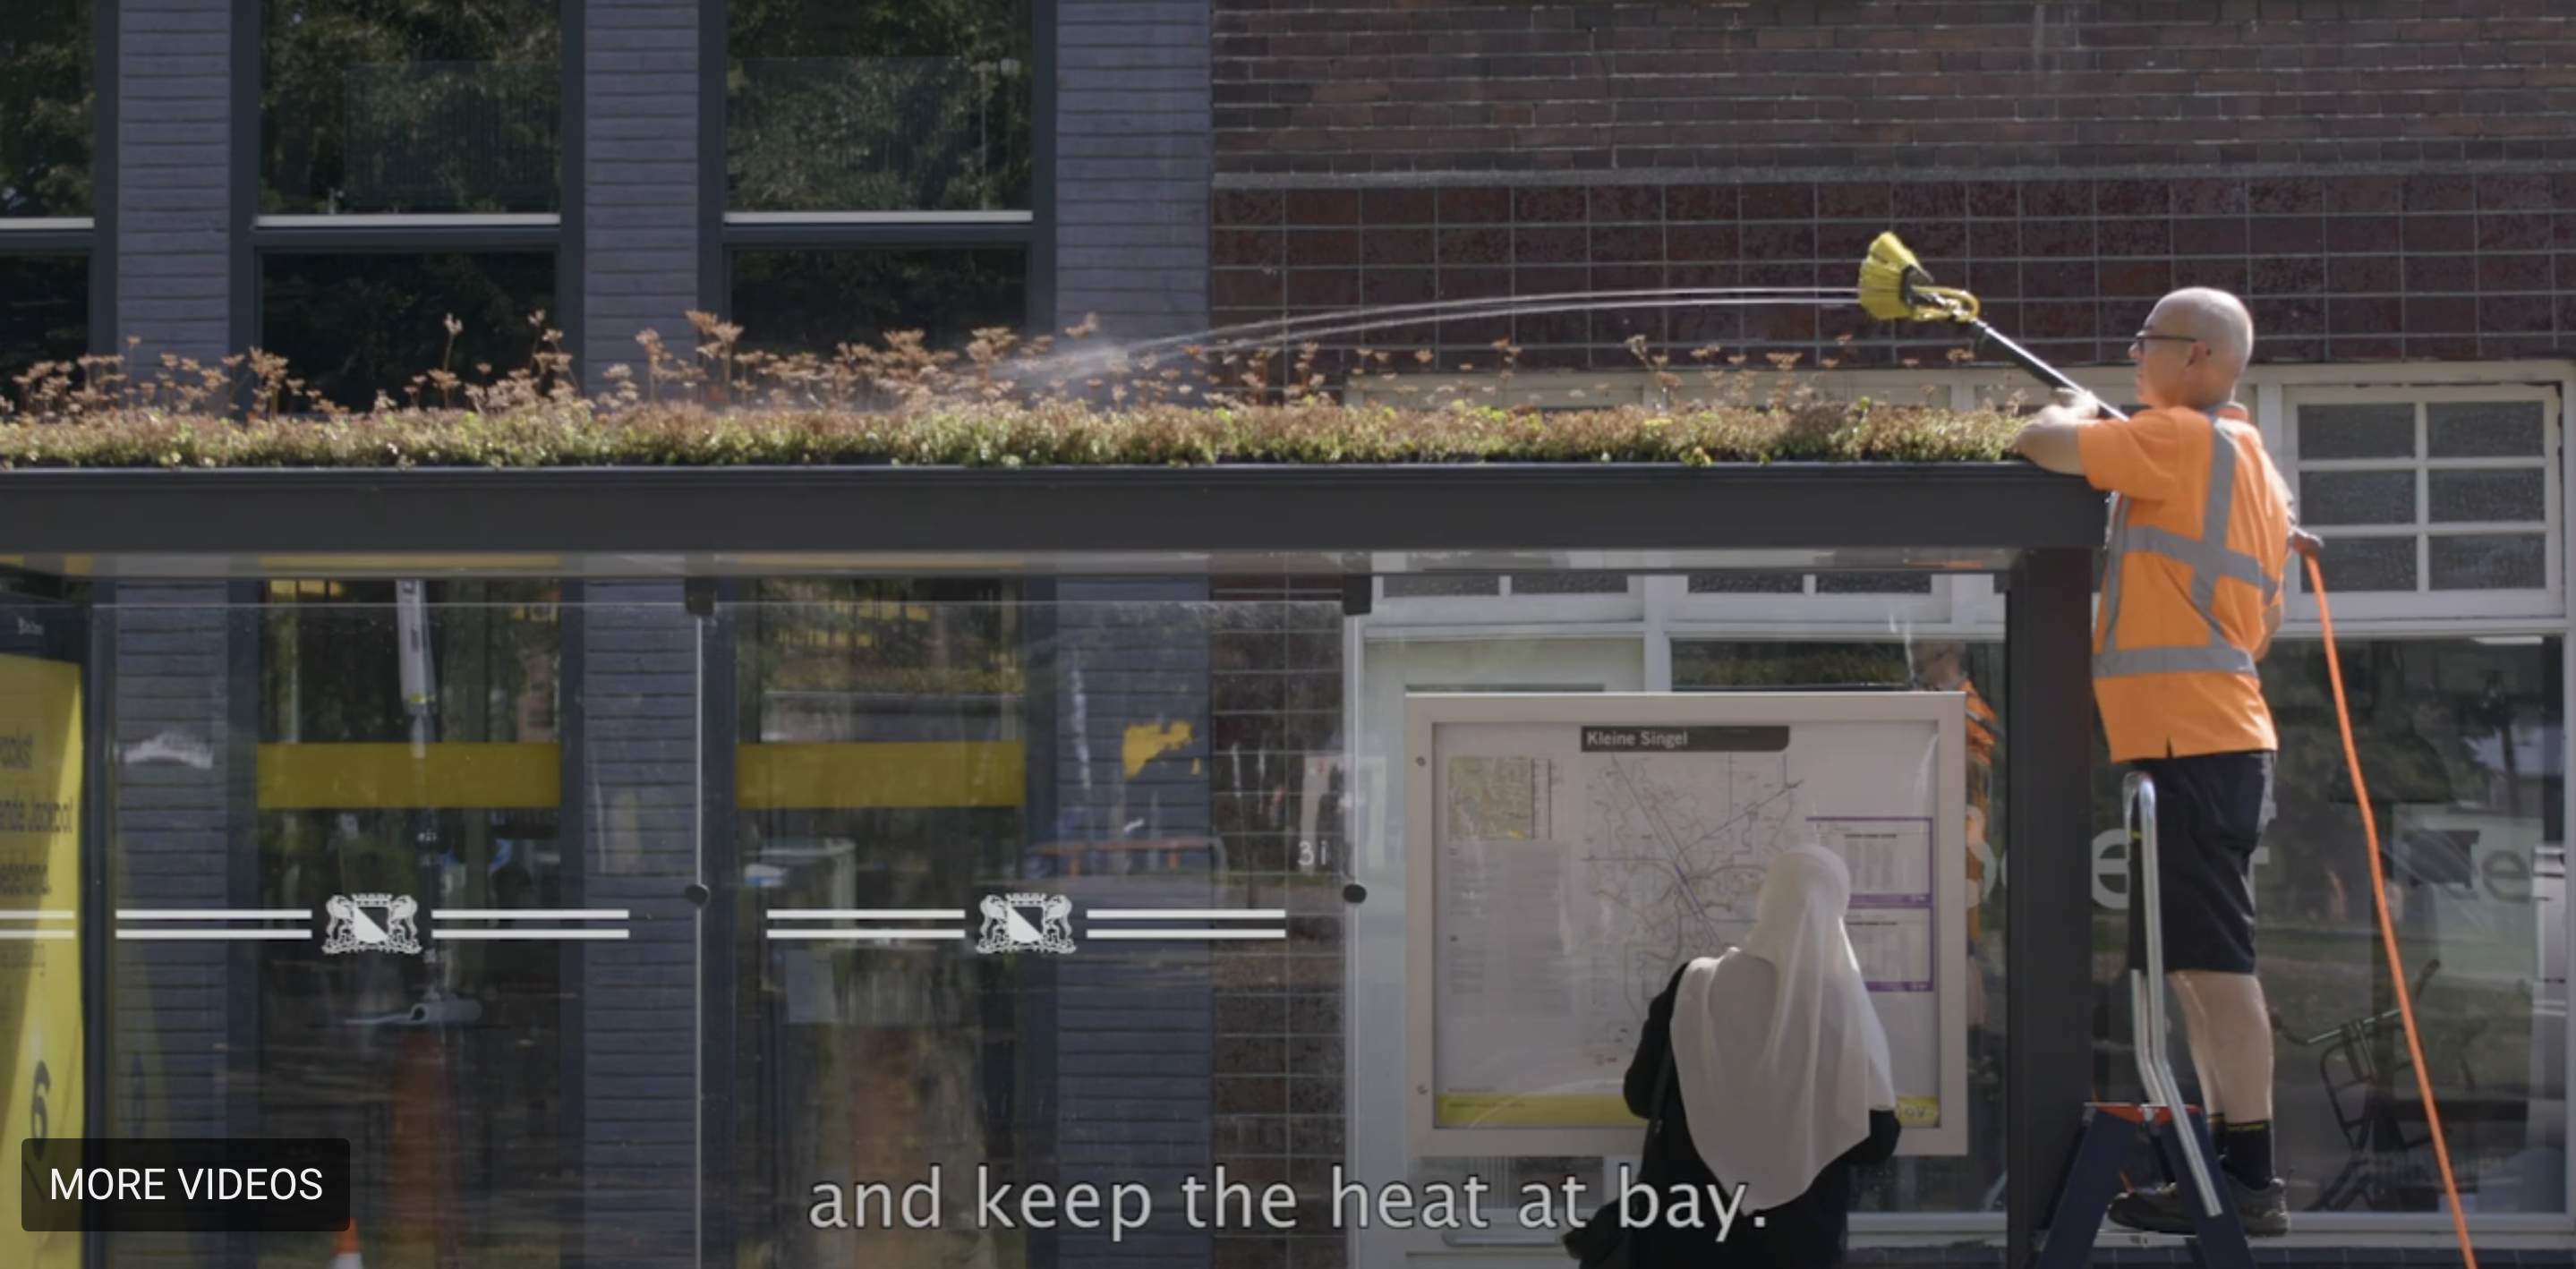 A greener bus stop: How the Utrecht green roof bus stop project helped pioneer sustainable public transit infrastructure.